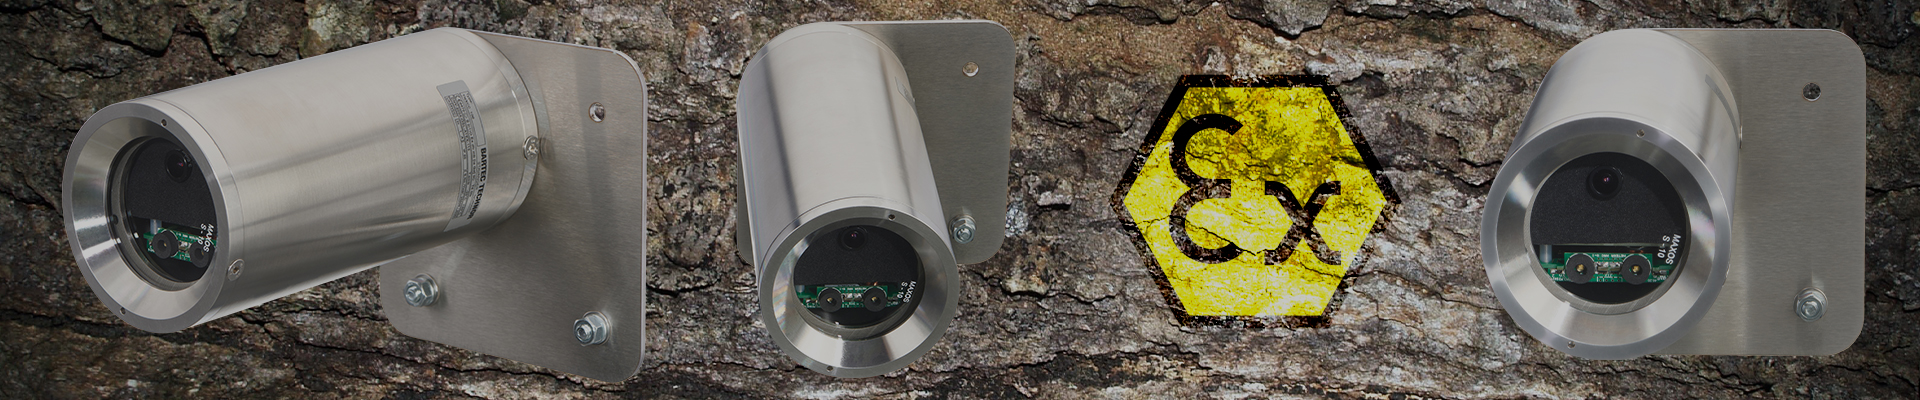 remote cameras for water quality test